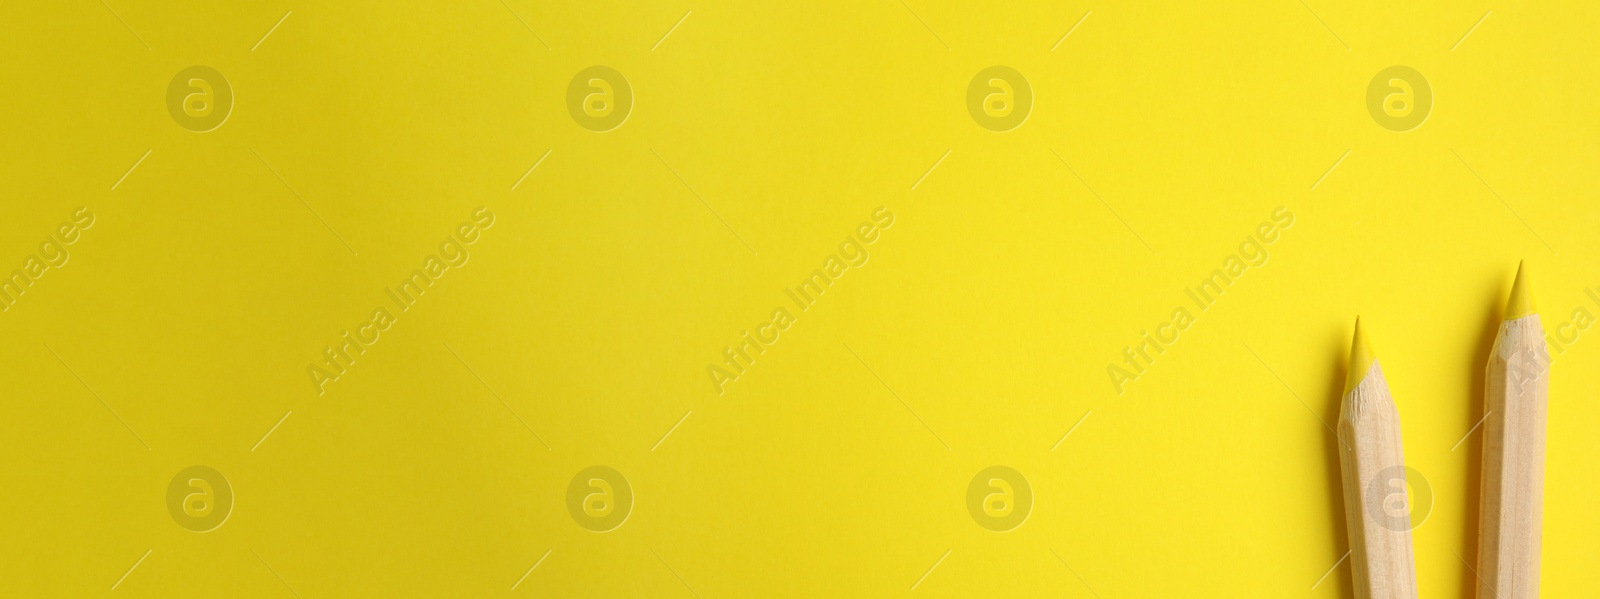 Image of Color pencils on yellow background, flat lay with space for text. Banner design